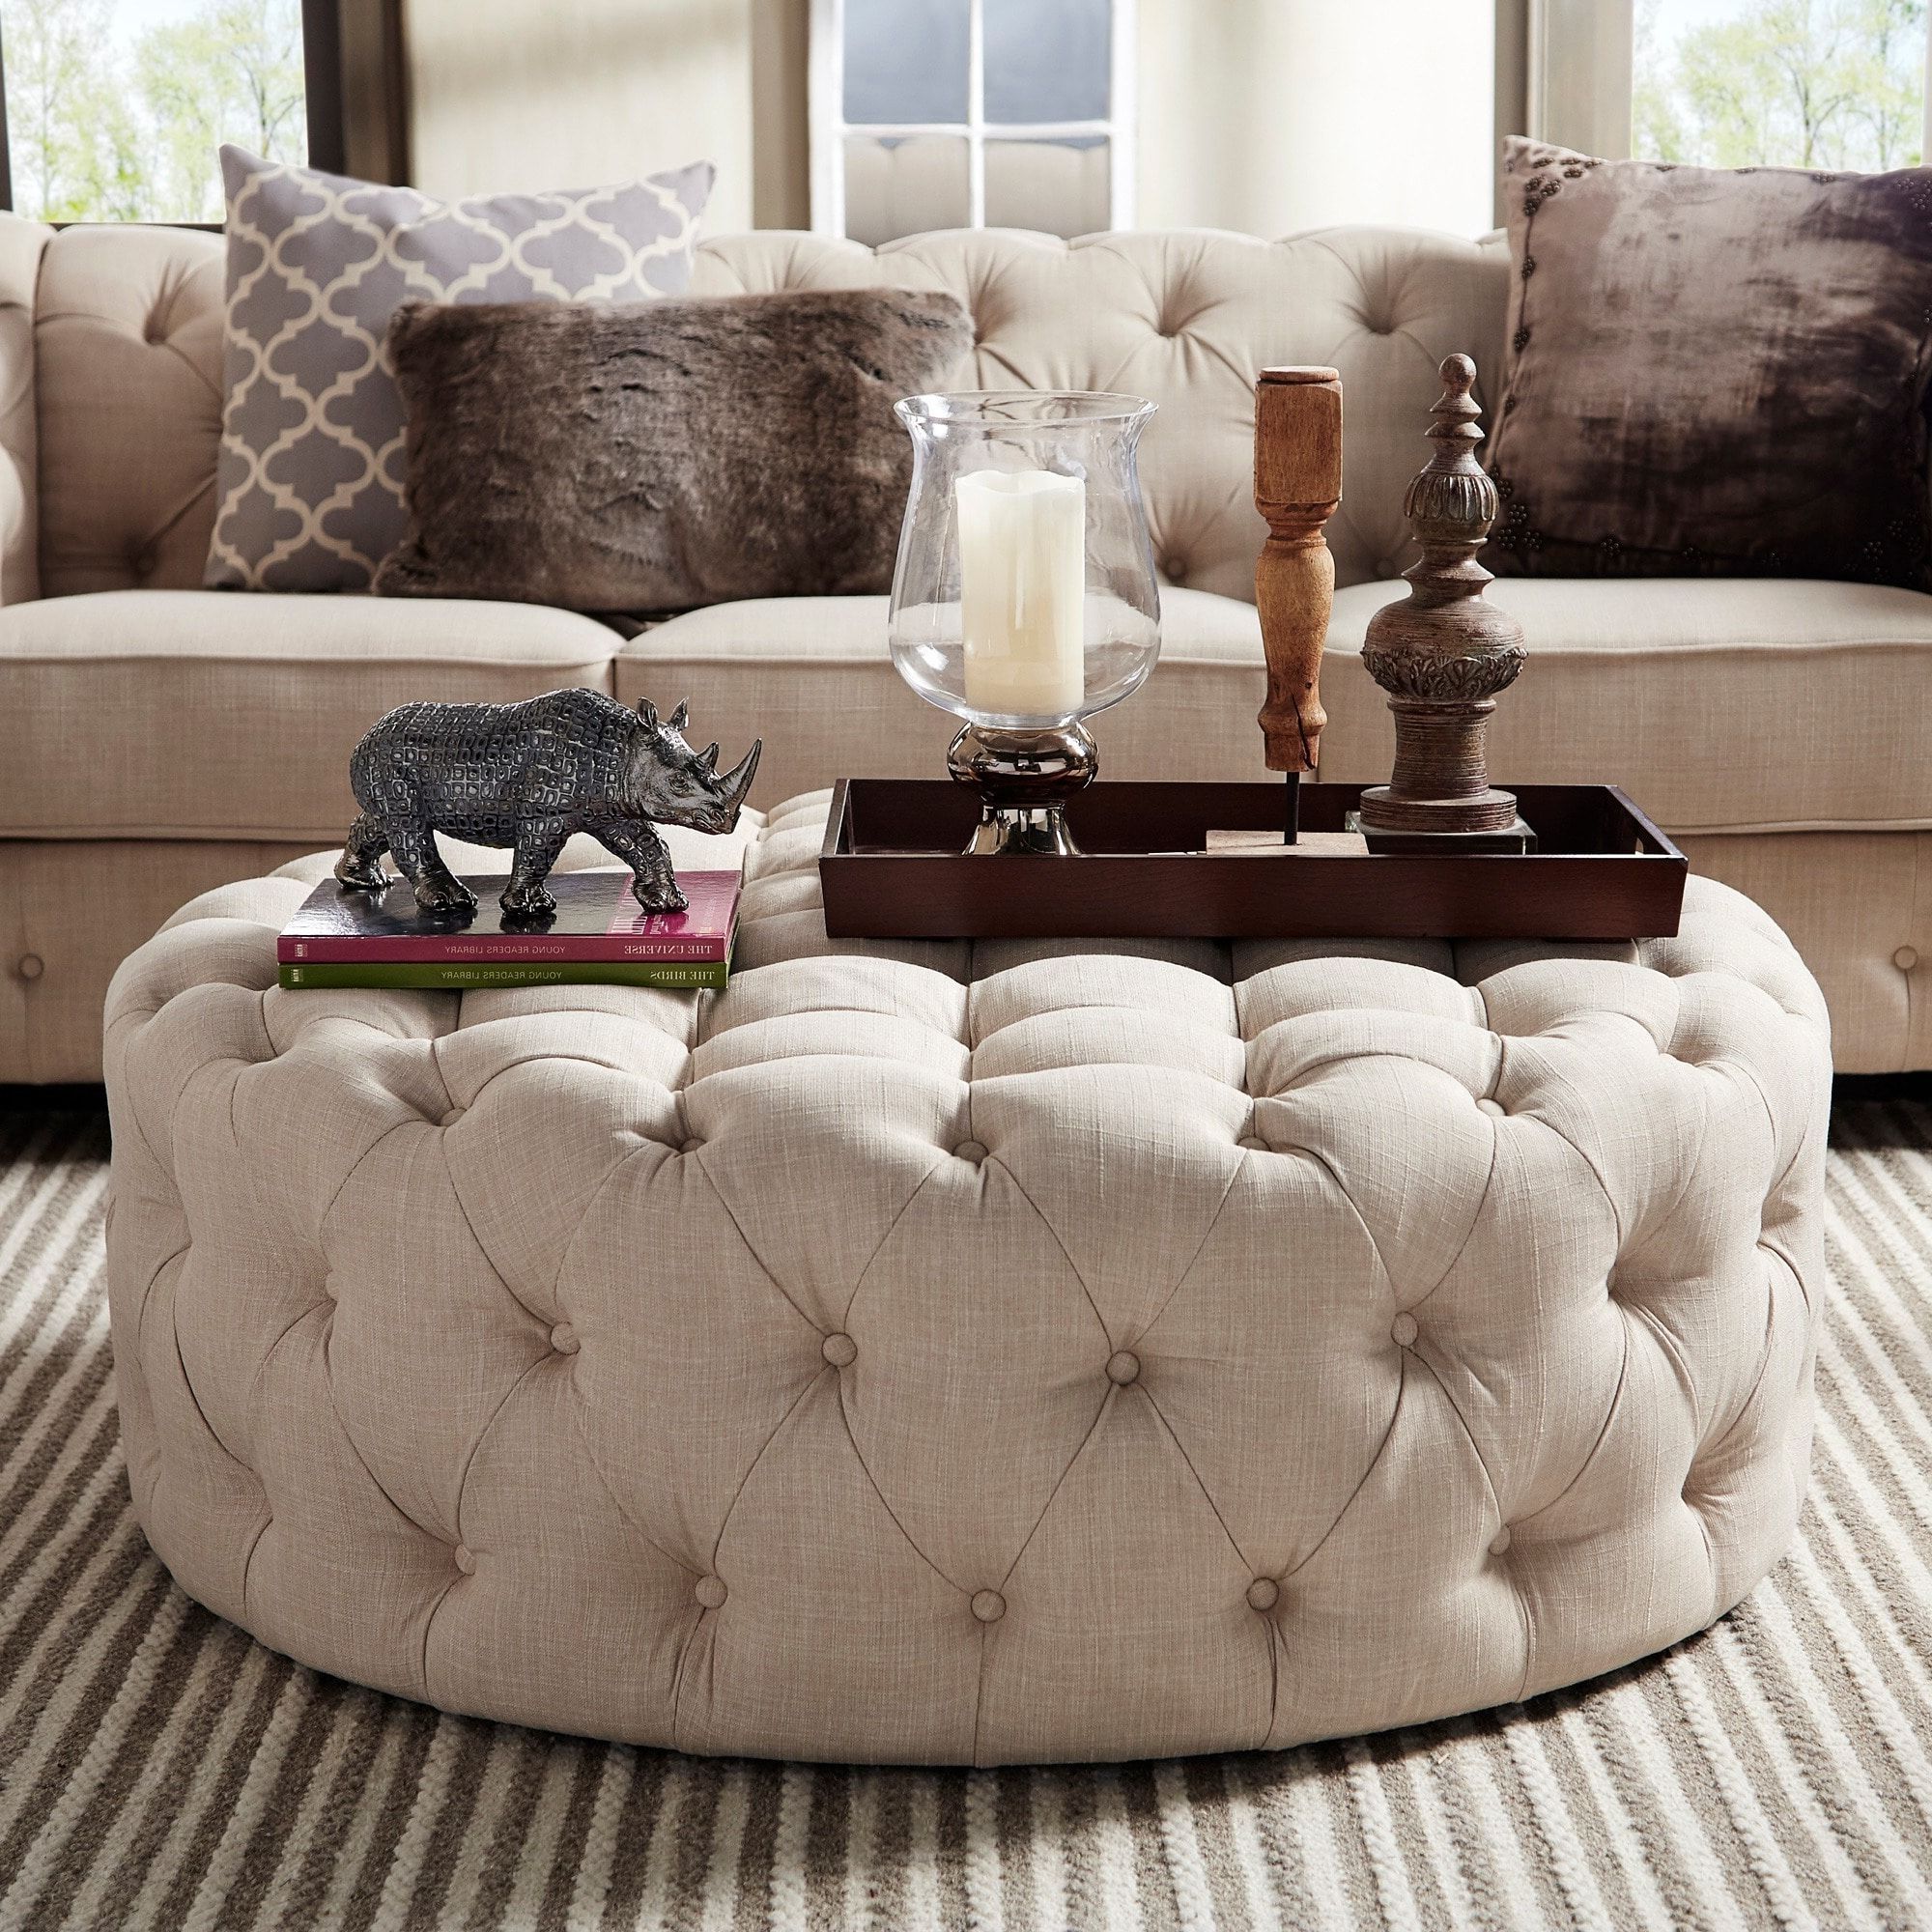 Gray Tufted Cocktail Ottomans Throughout Most Current Knightsbridge Round Tufted Cocktail Ottoman With Castersinspire Q (View 8 of 10)